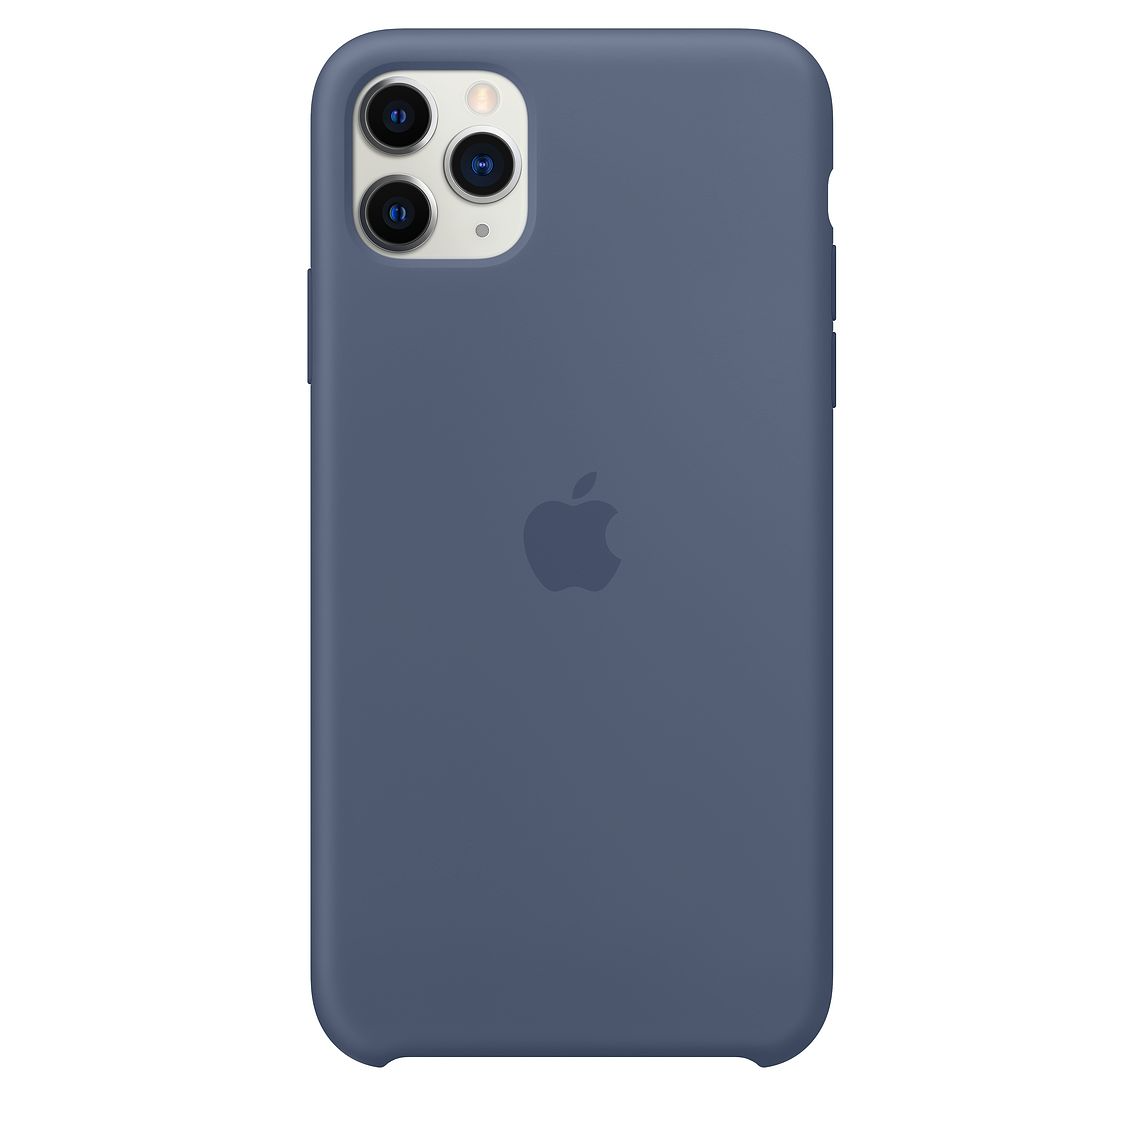 Silicone Case For iPhone 11 Pro Max - Lavender